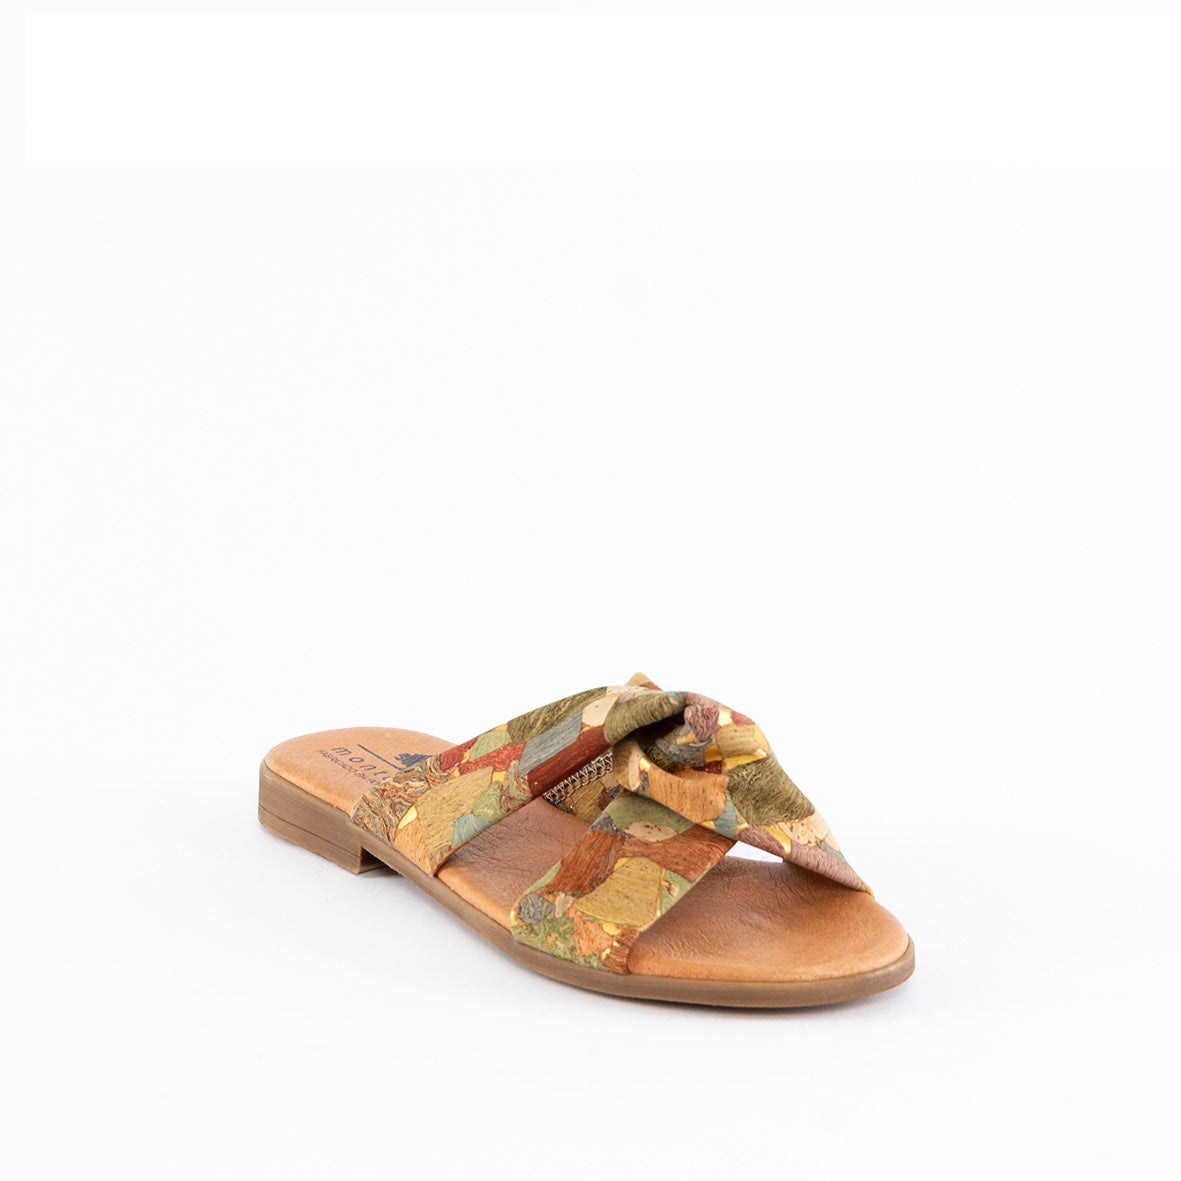 Cork Sandals Bow | Cork Shoes | Handmade in Portugal